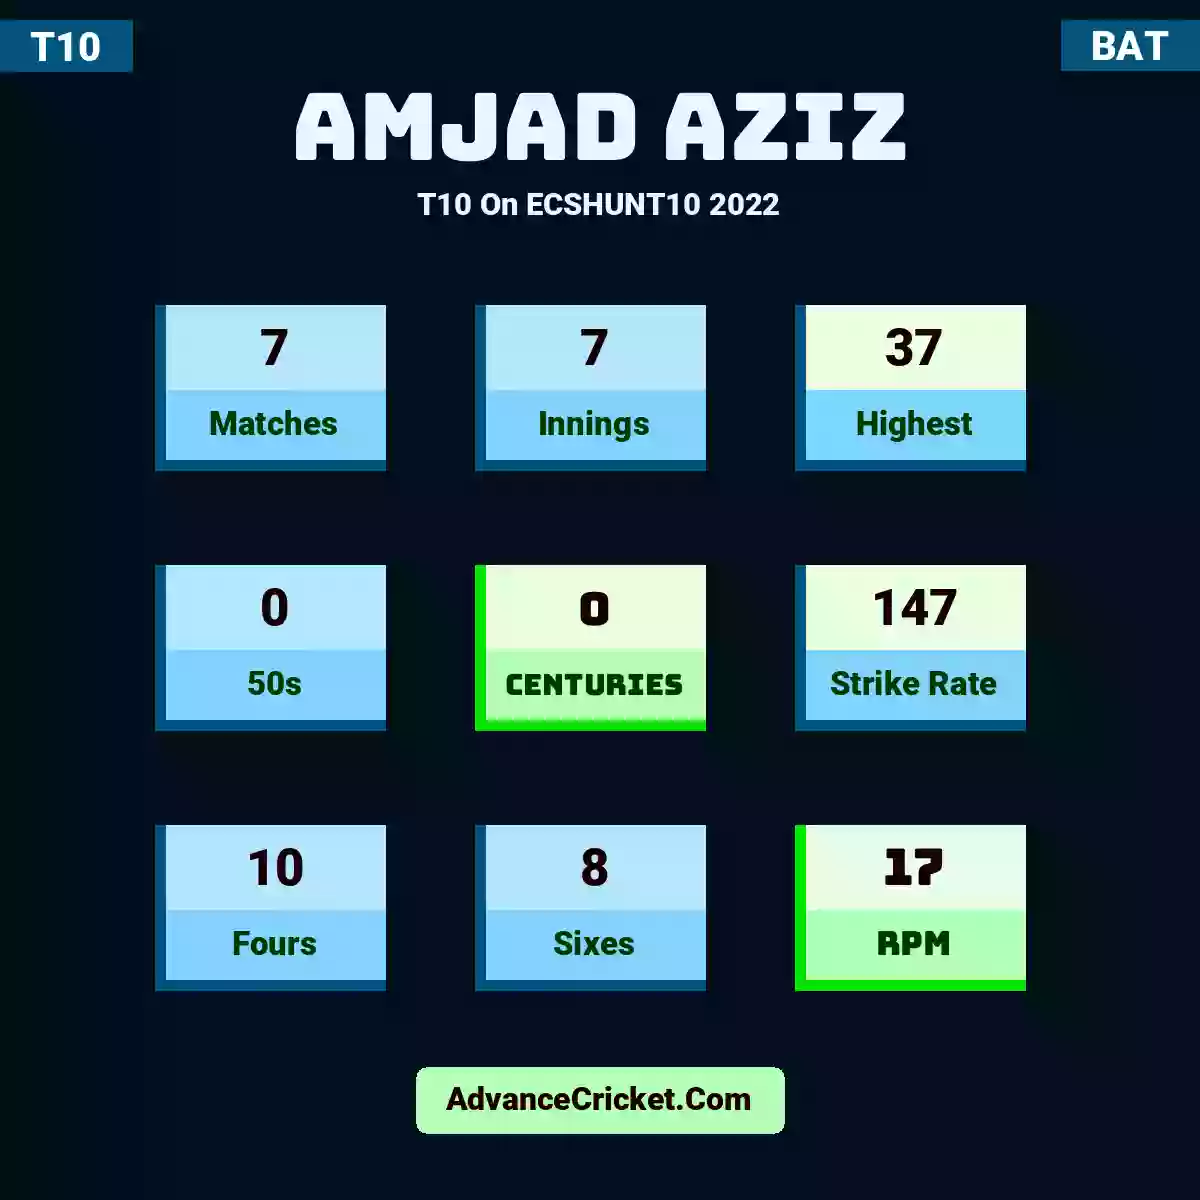 Amjad Aziz T10  On ECSHUNT10 2022, Amjad Aziz played 7 matches, scored 37 runs as highest, 0 half-centuries, and 0 centuries, with a strike rate of 147. A.Aziz hit 10 fours and 8 sixes, with an RPM of 17.